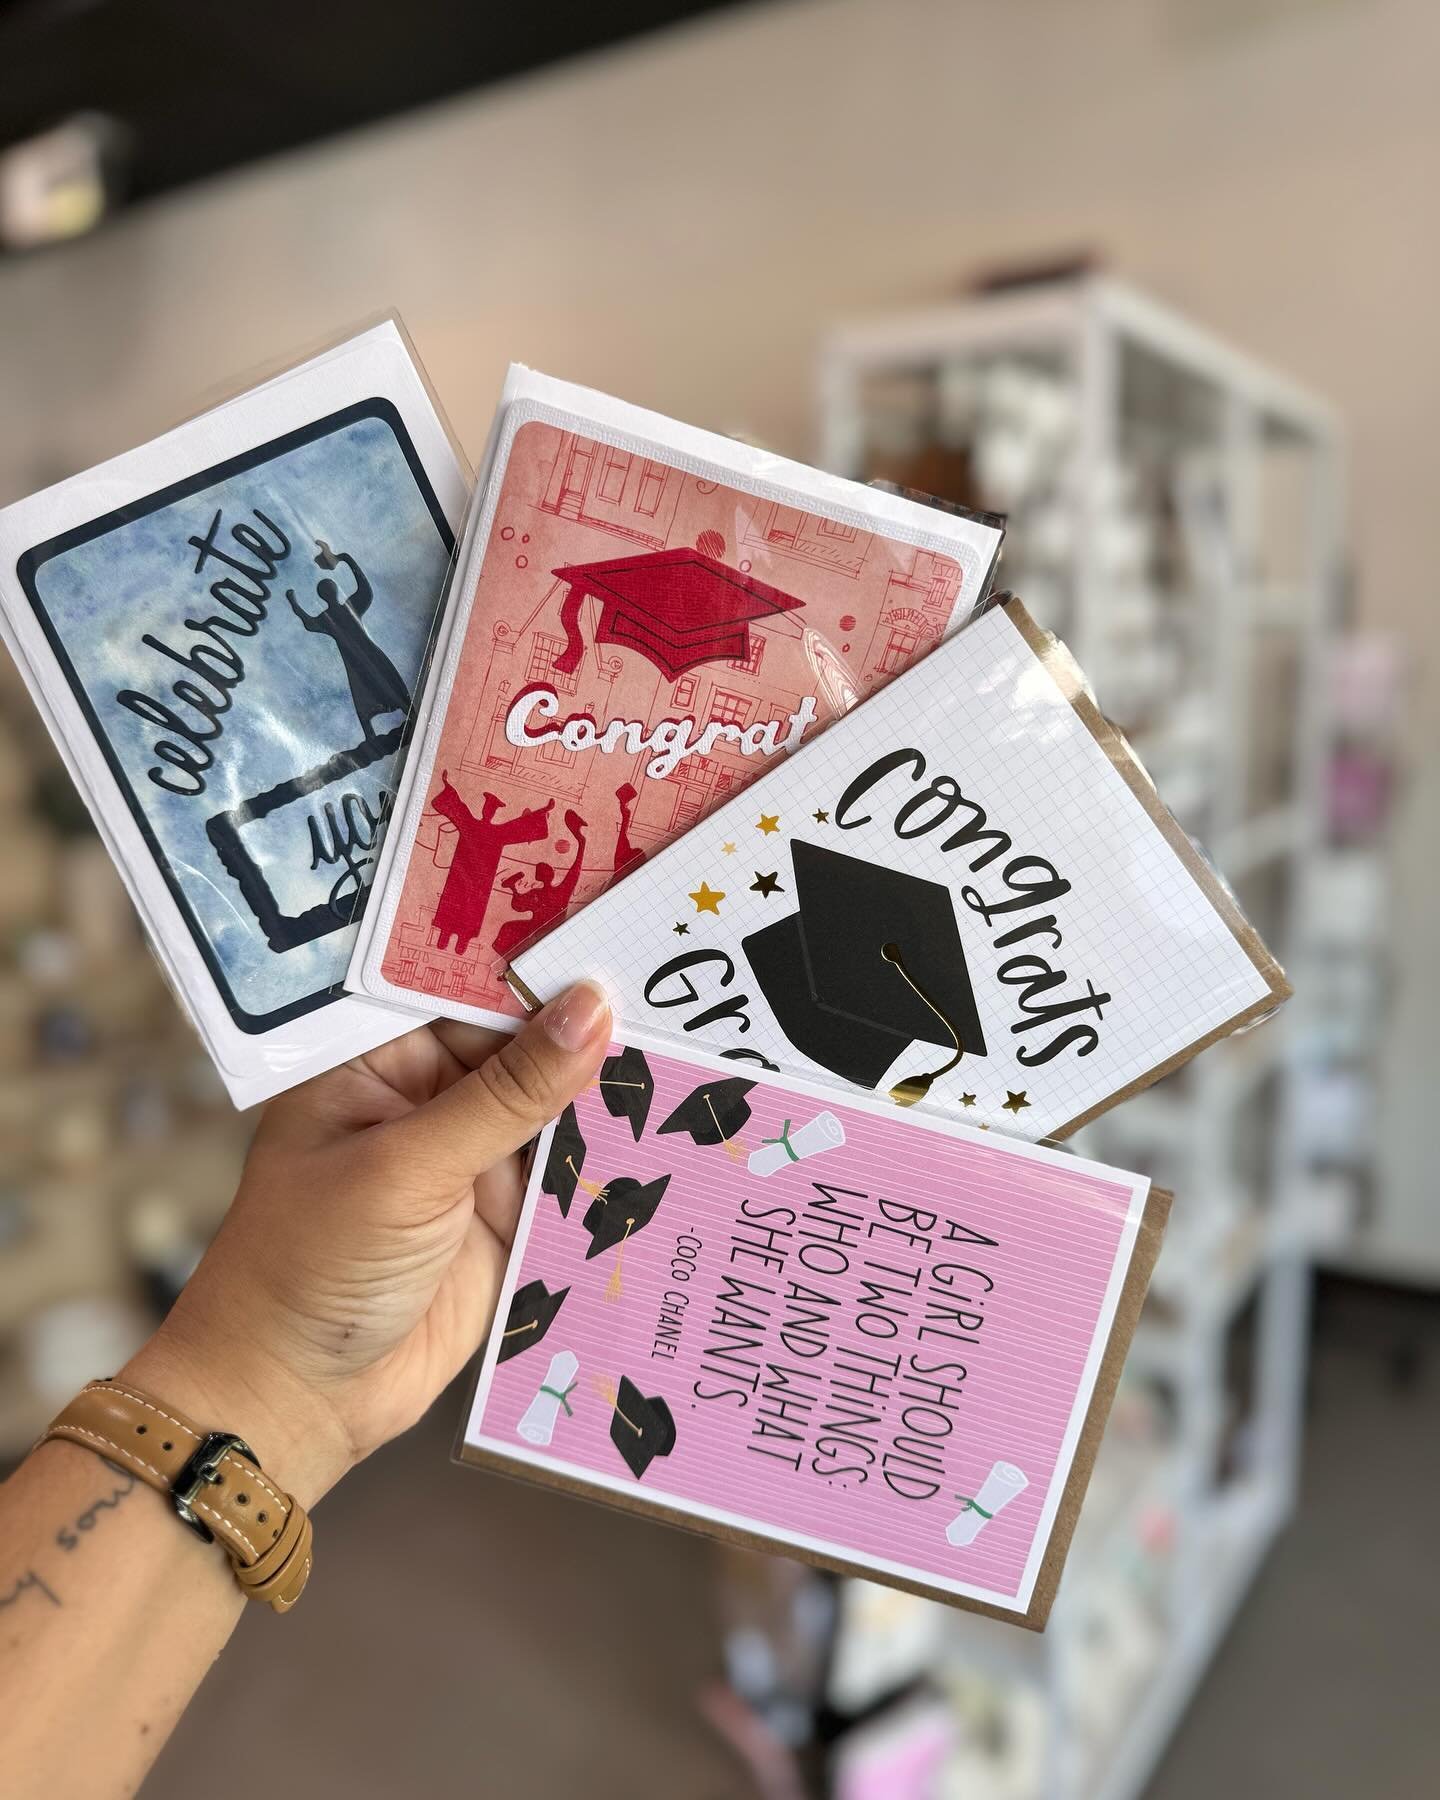 🎓Make graduation day even more special with unique, handmade gifts by local makers! Belle Mercantile has them all in one place to make your life a little easier! ☺️ 

#graduation #shoplocal #artisanmade #uniquefinds #bellefontepa #lovebft #shopbelle